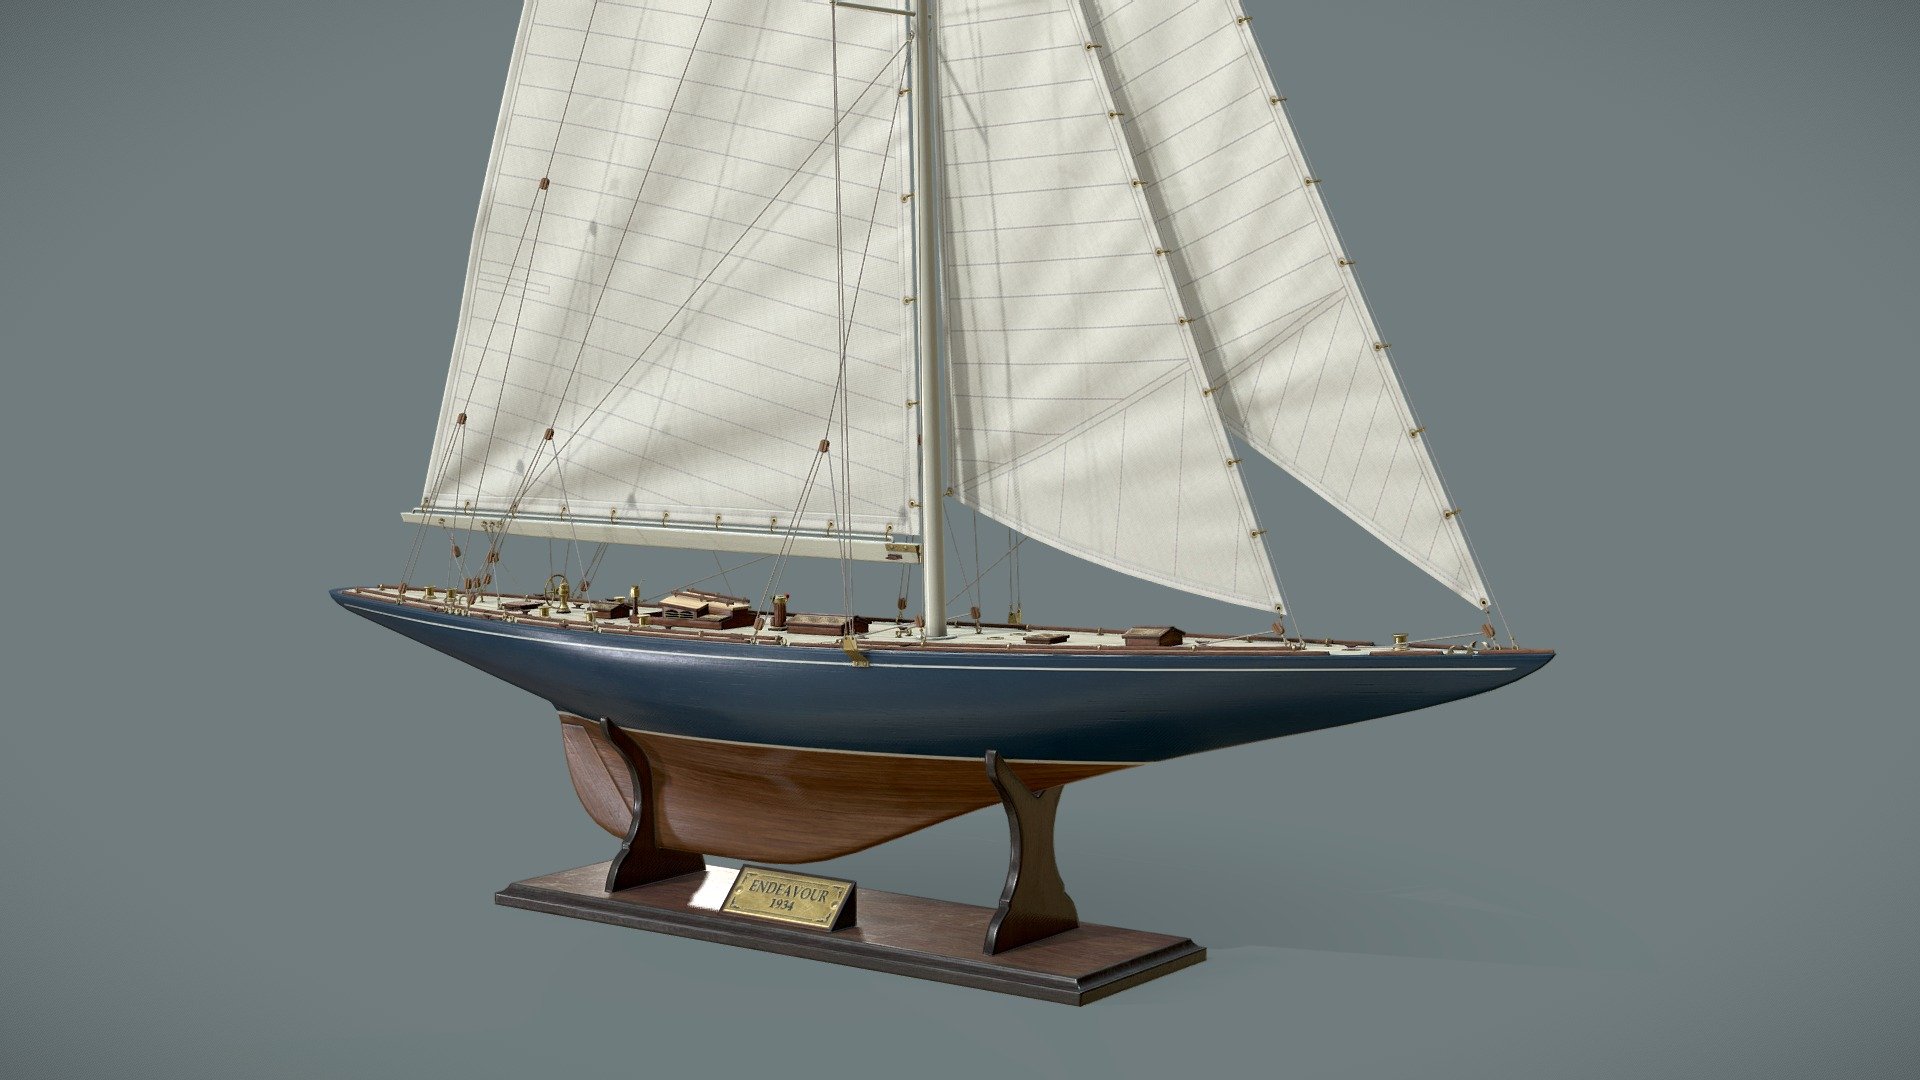 This is the low poly model of 1934 J-class sailboat Endeavour, America's Cup challenger 3d model